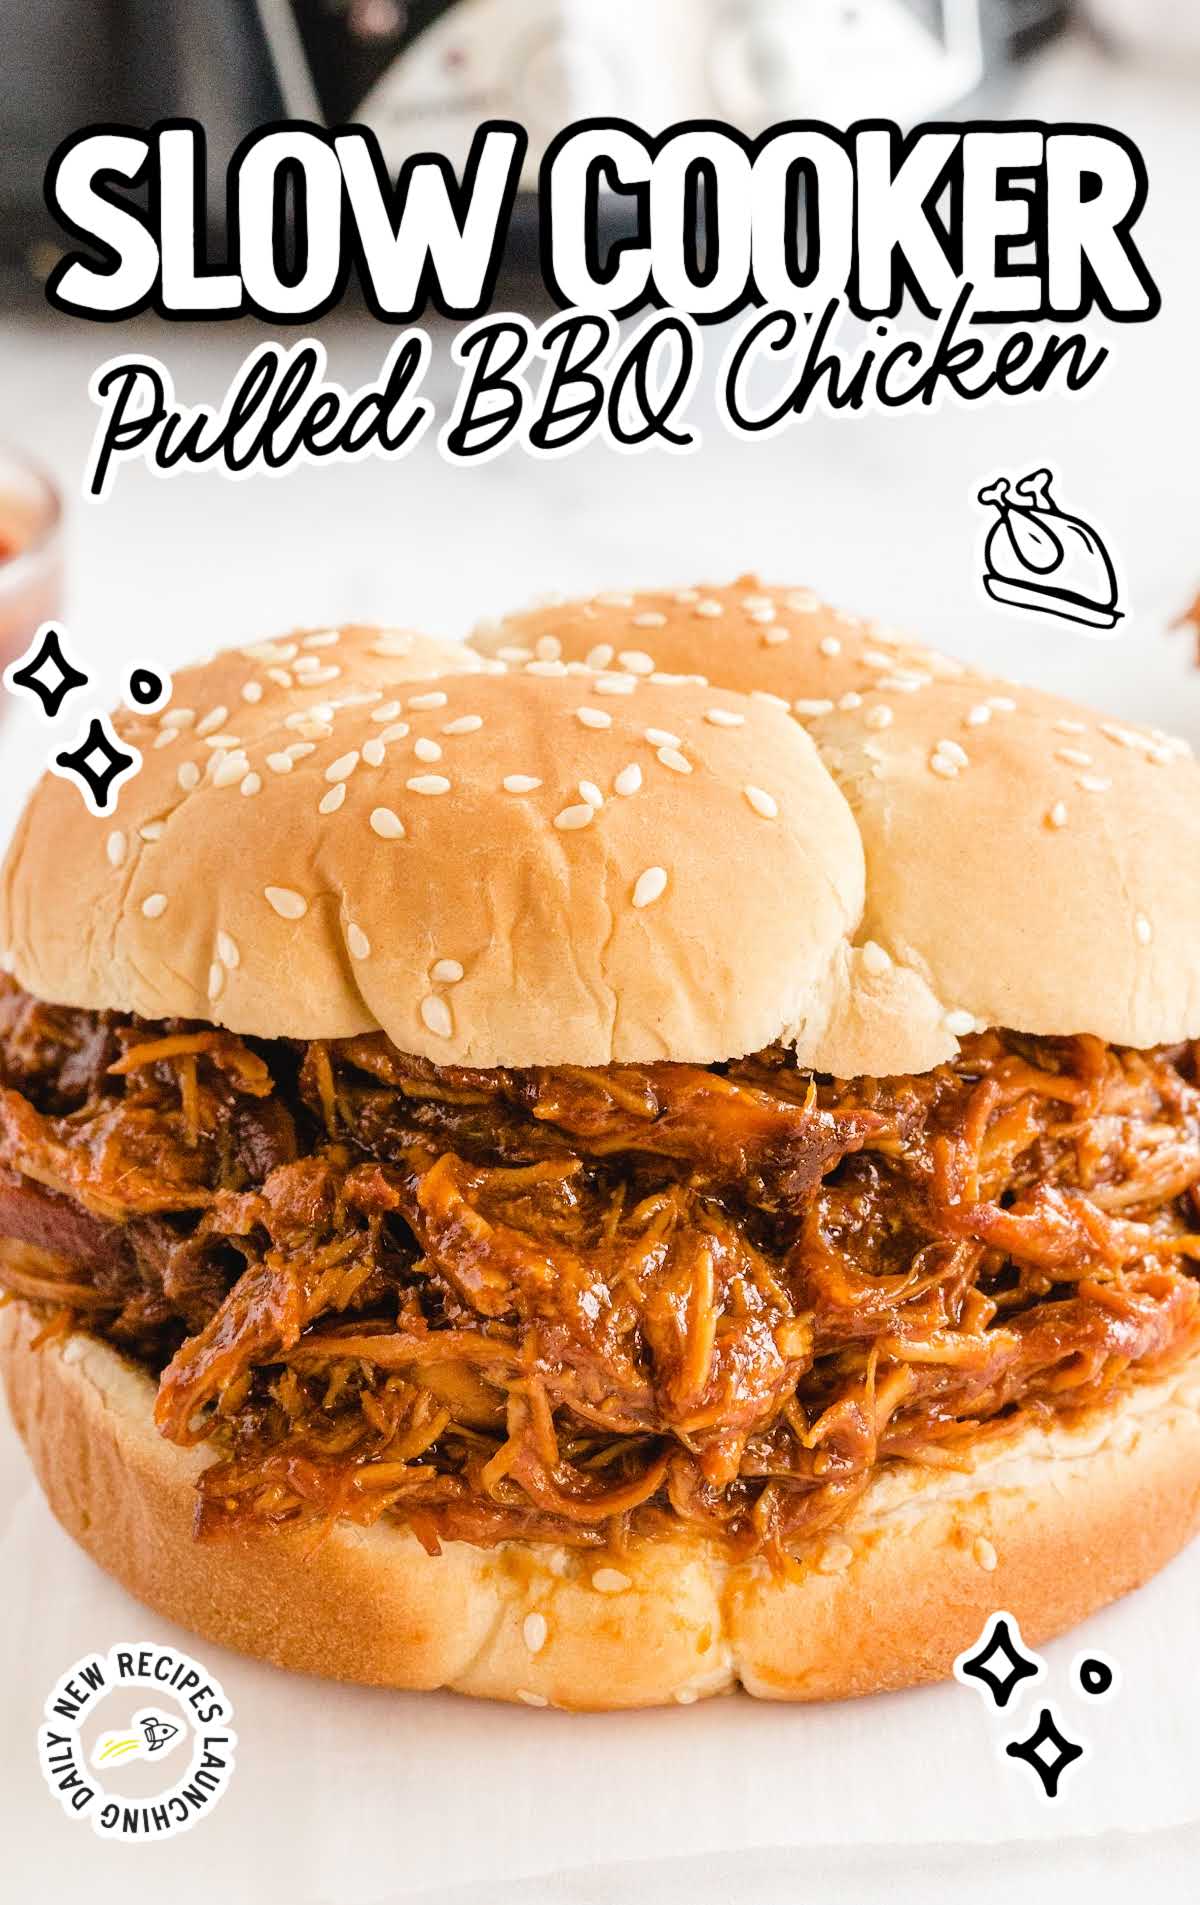 close up shot of a pulled bbq chicken sandwich